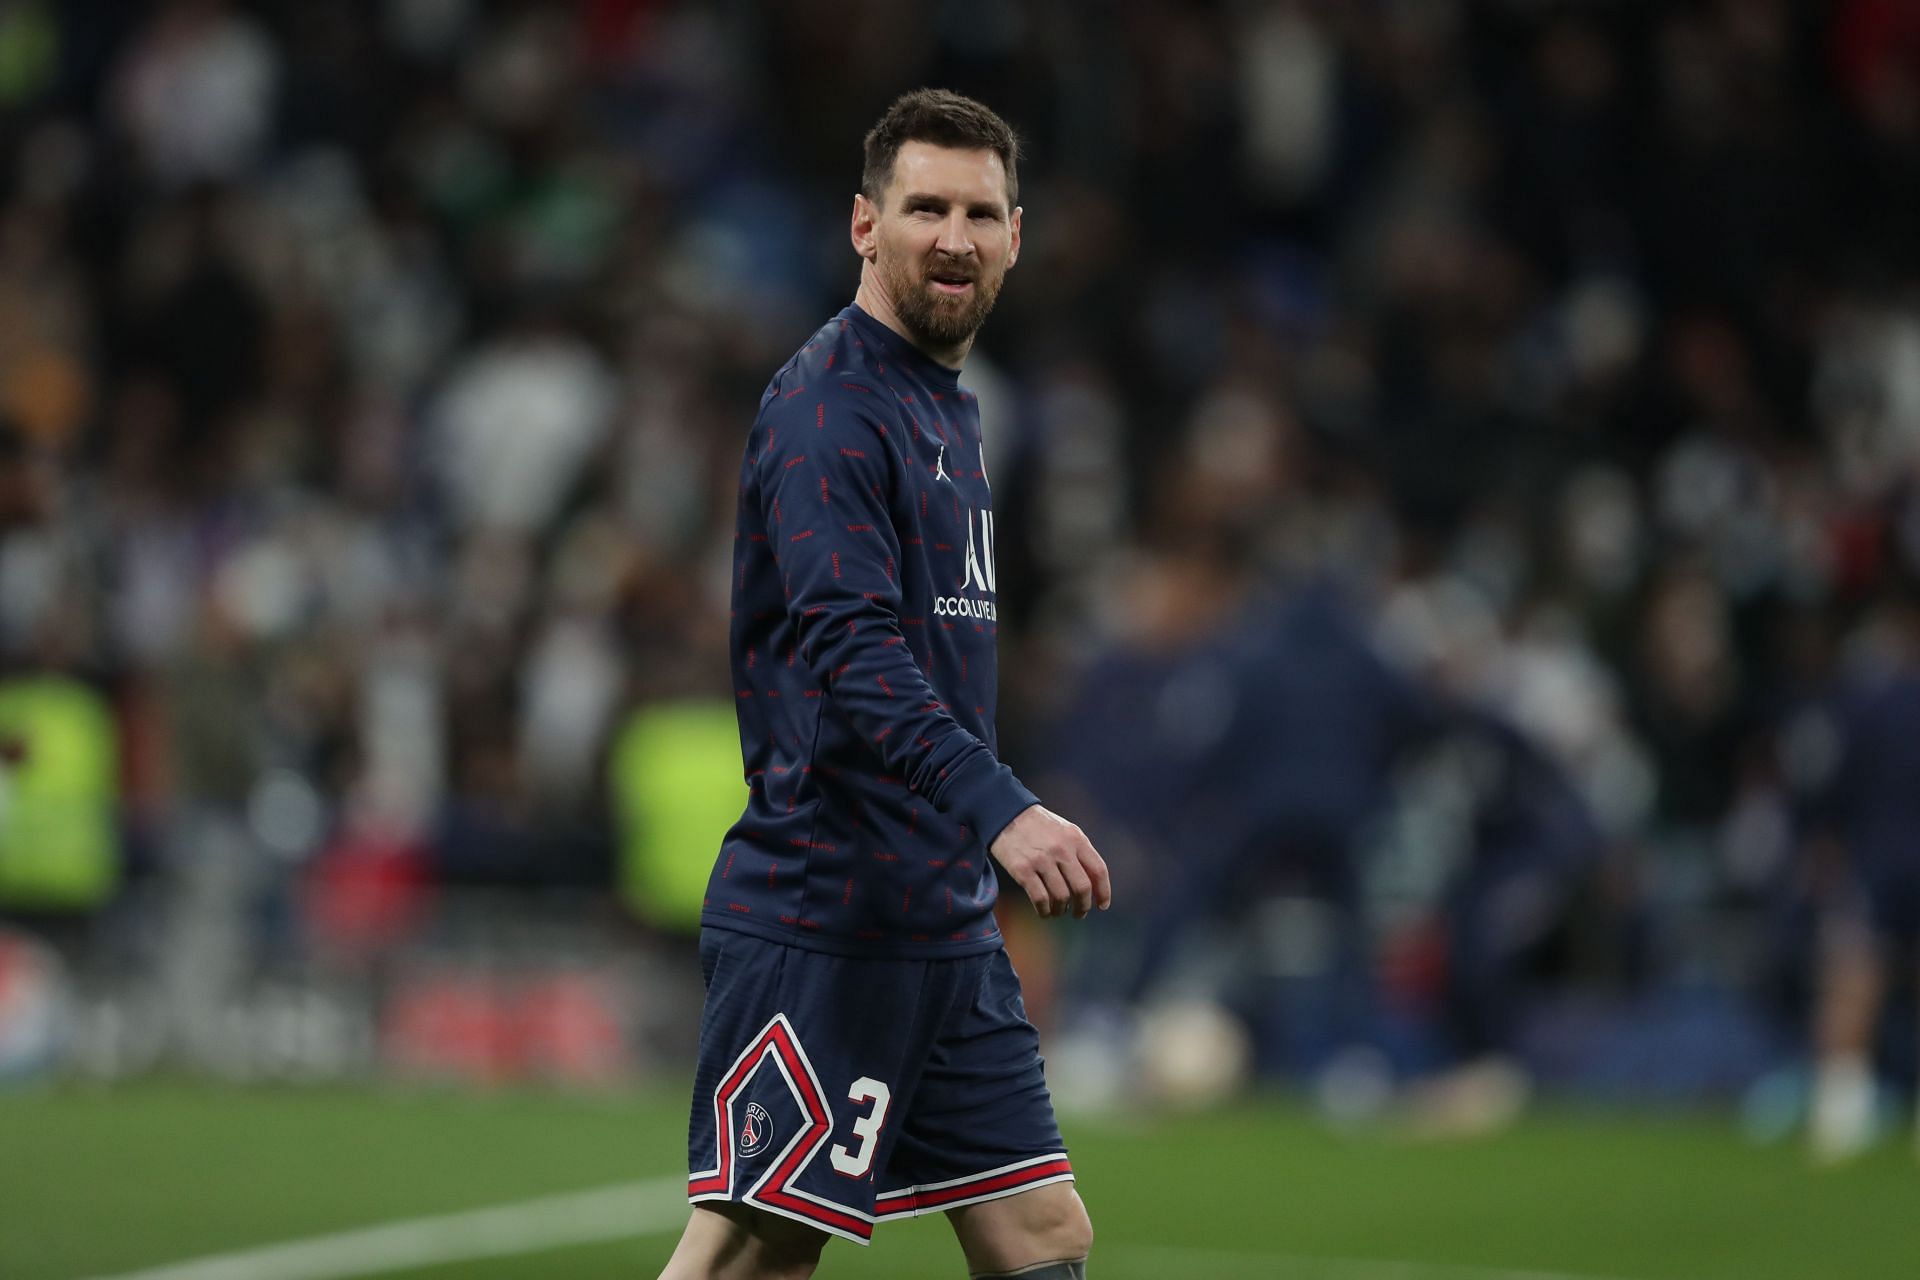 Lionel Messi has not been usual self in Paris this season.